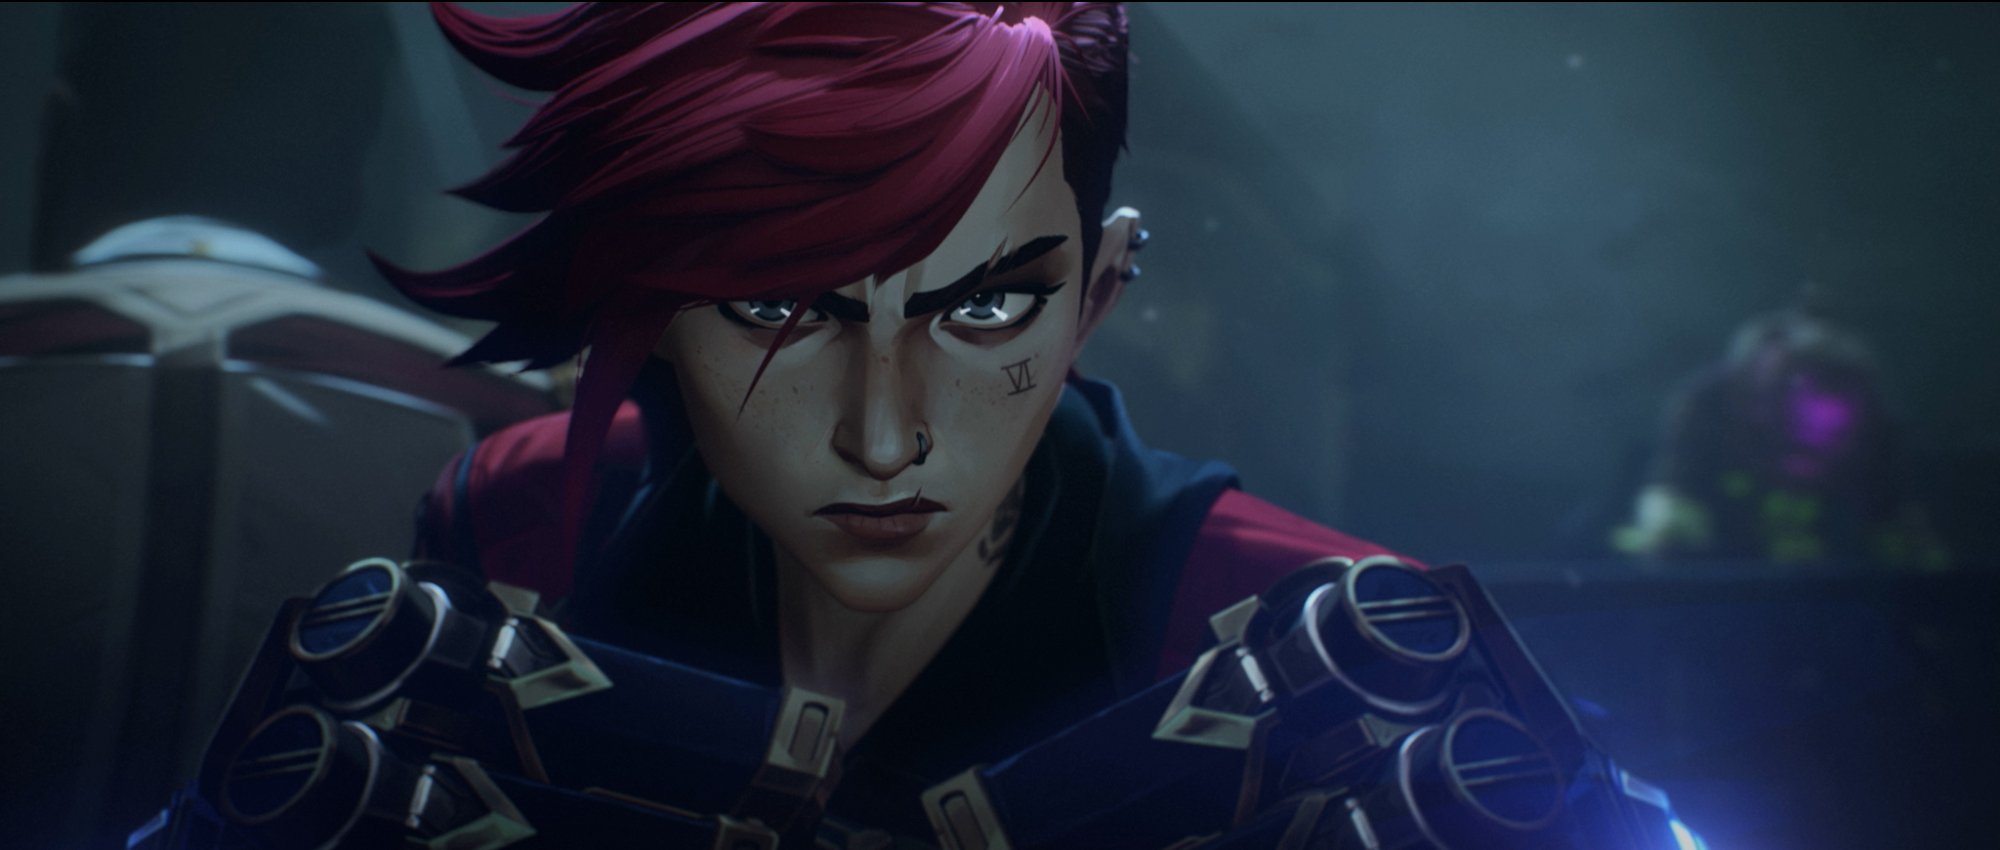 Vi-in-League-of-Legends-show-Arcane-as-the-featured-image-about-if-Vi-and-Caitlyn-are-LGBTQ.jpg